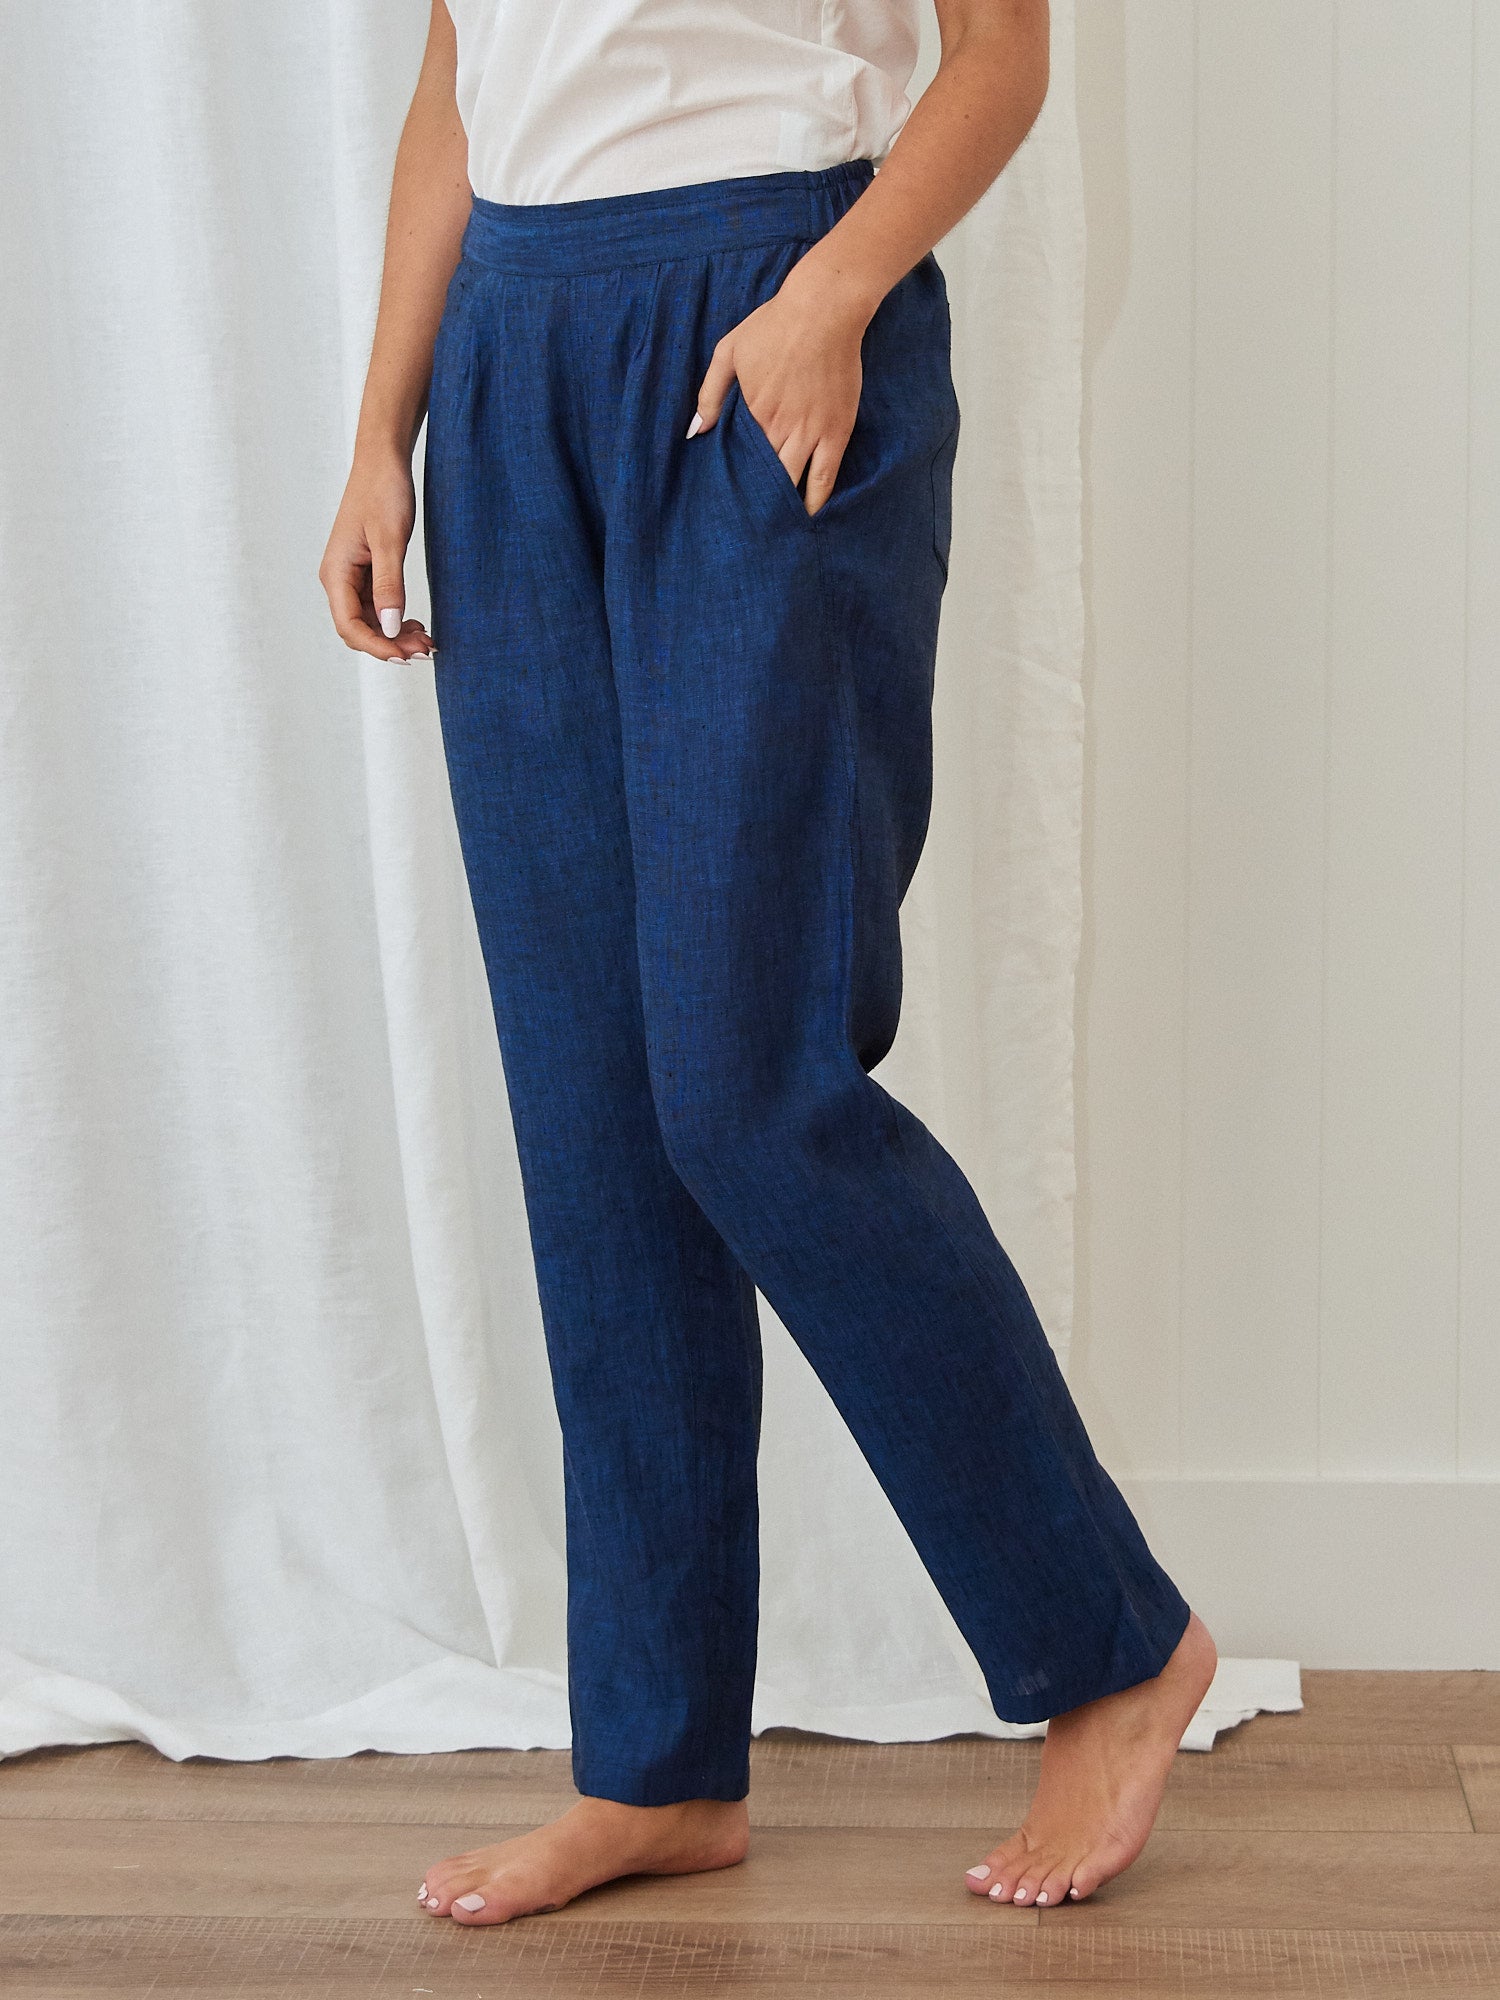 Voyager Linen Pants in Sky Blue Chambray